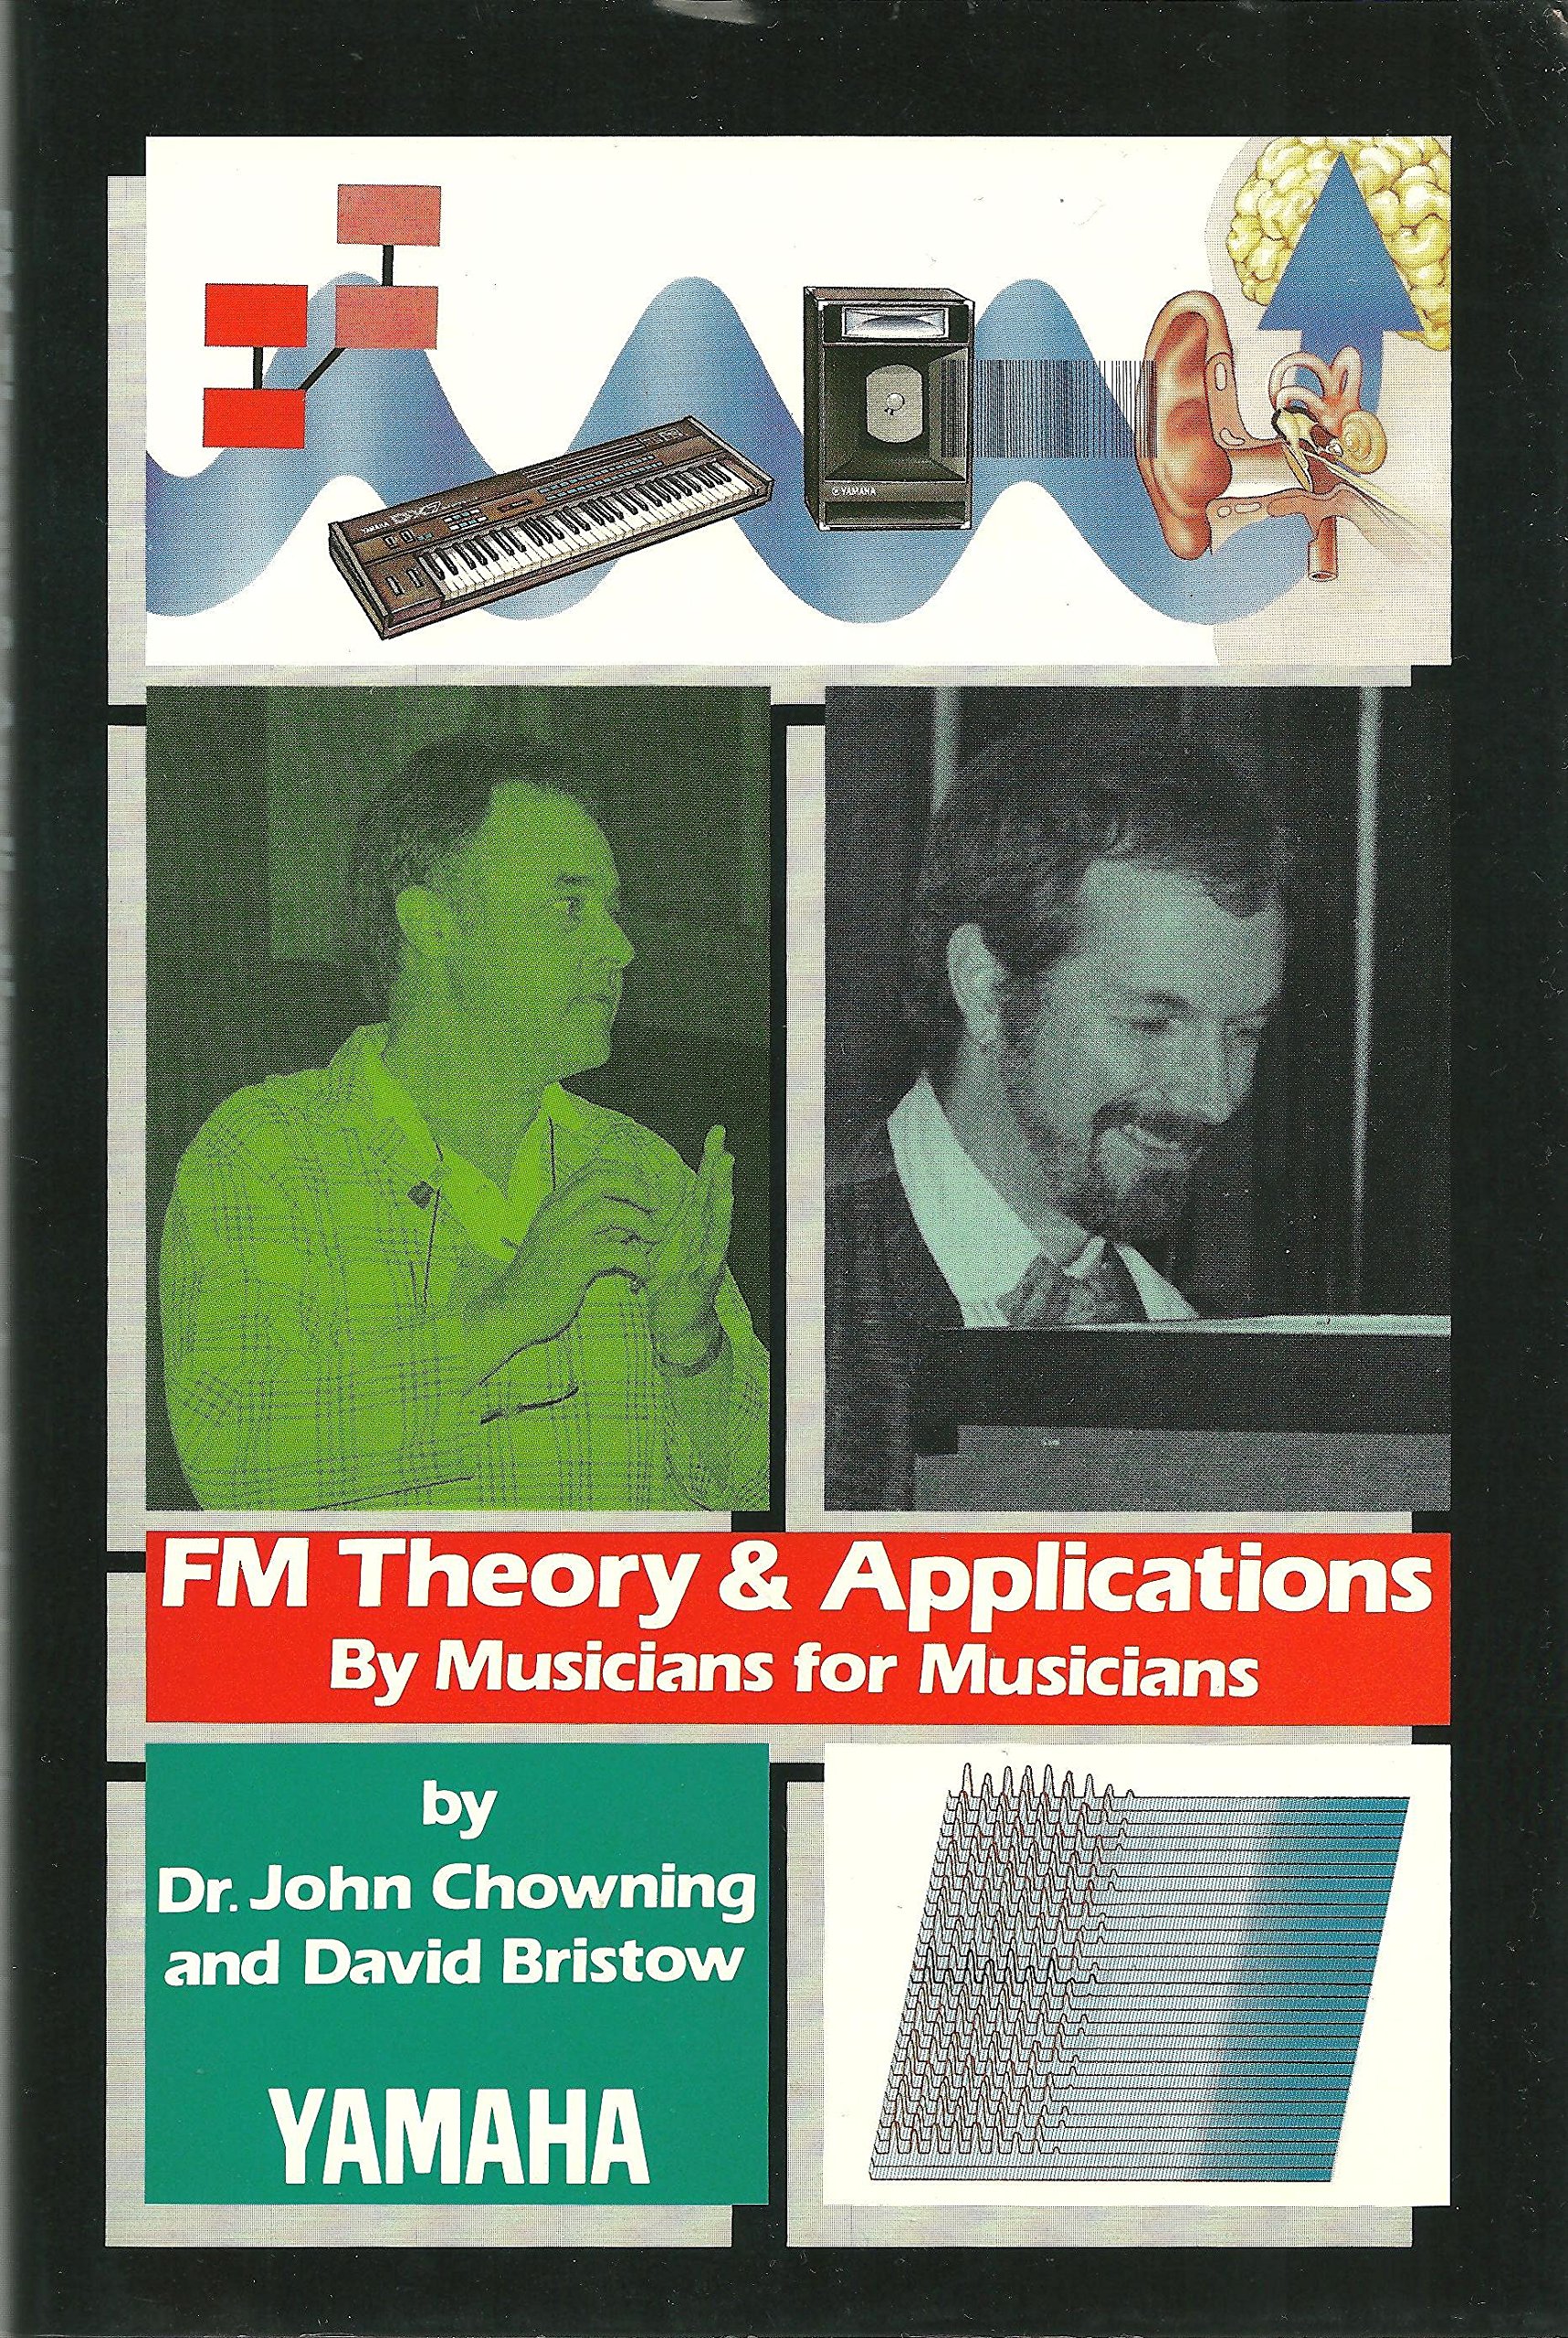 FM Theory and Applications: By Musicians for Musicians by John Chowning and David Bristow